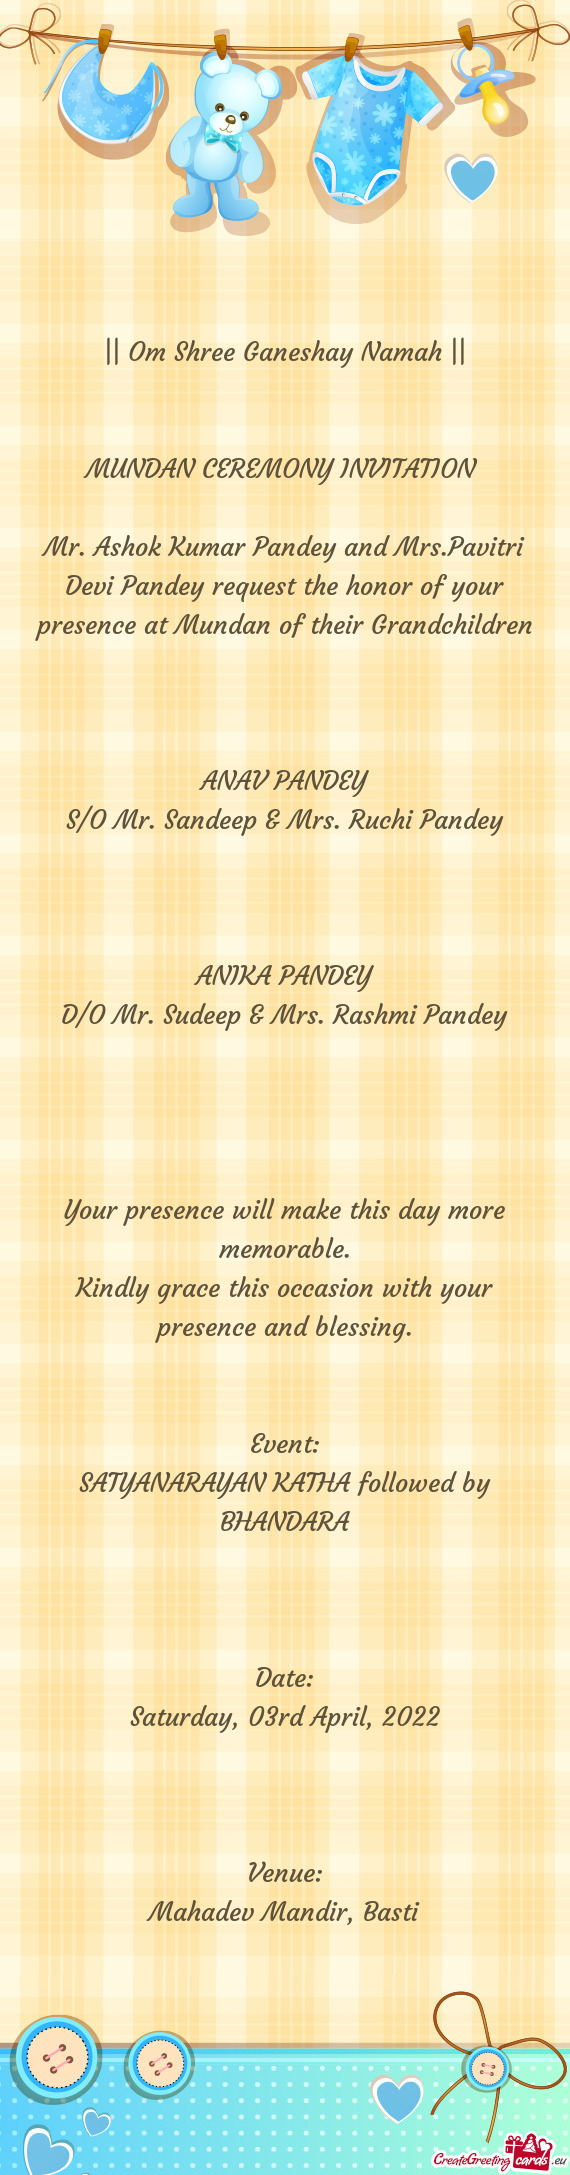 Mr. Ashok Kumar Pandey and Mrs.Pavitri Devi Pandey request the honor of your presence at Mundan of t